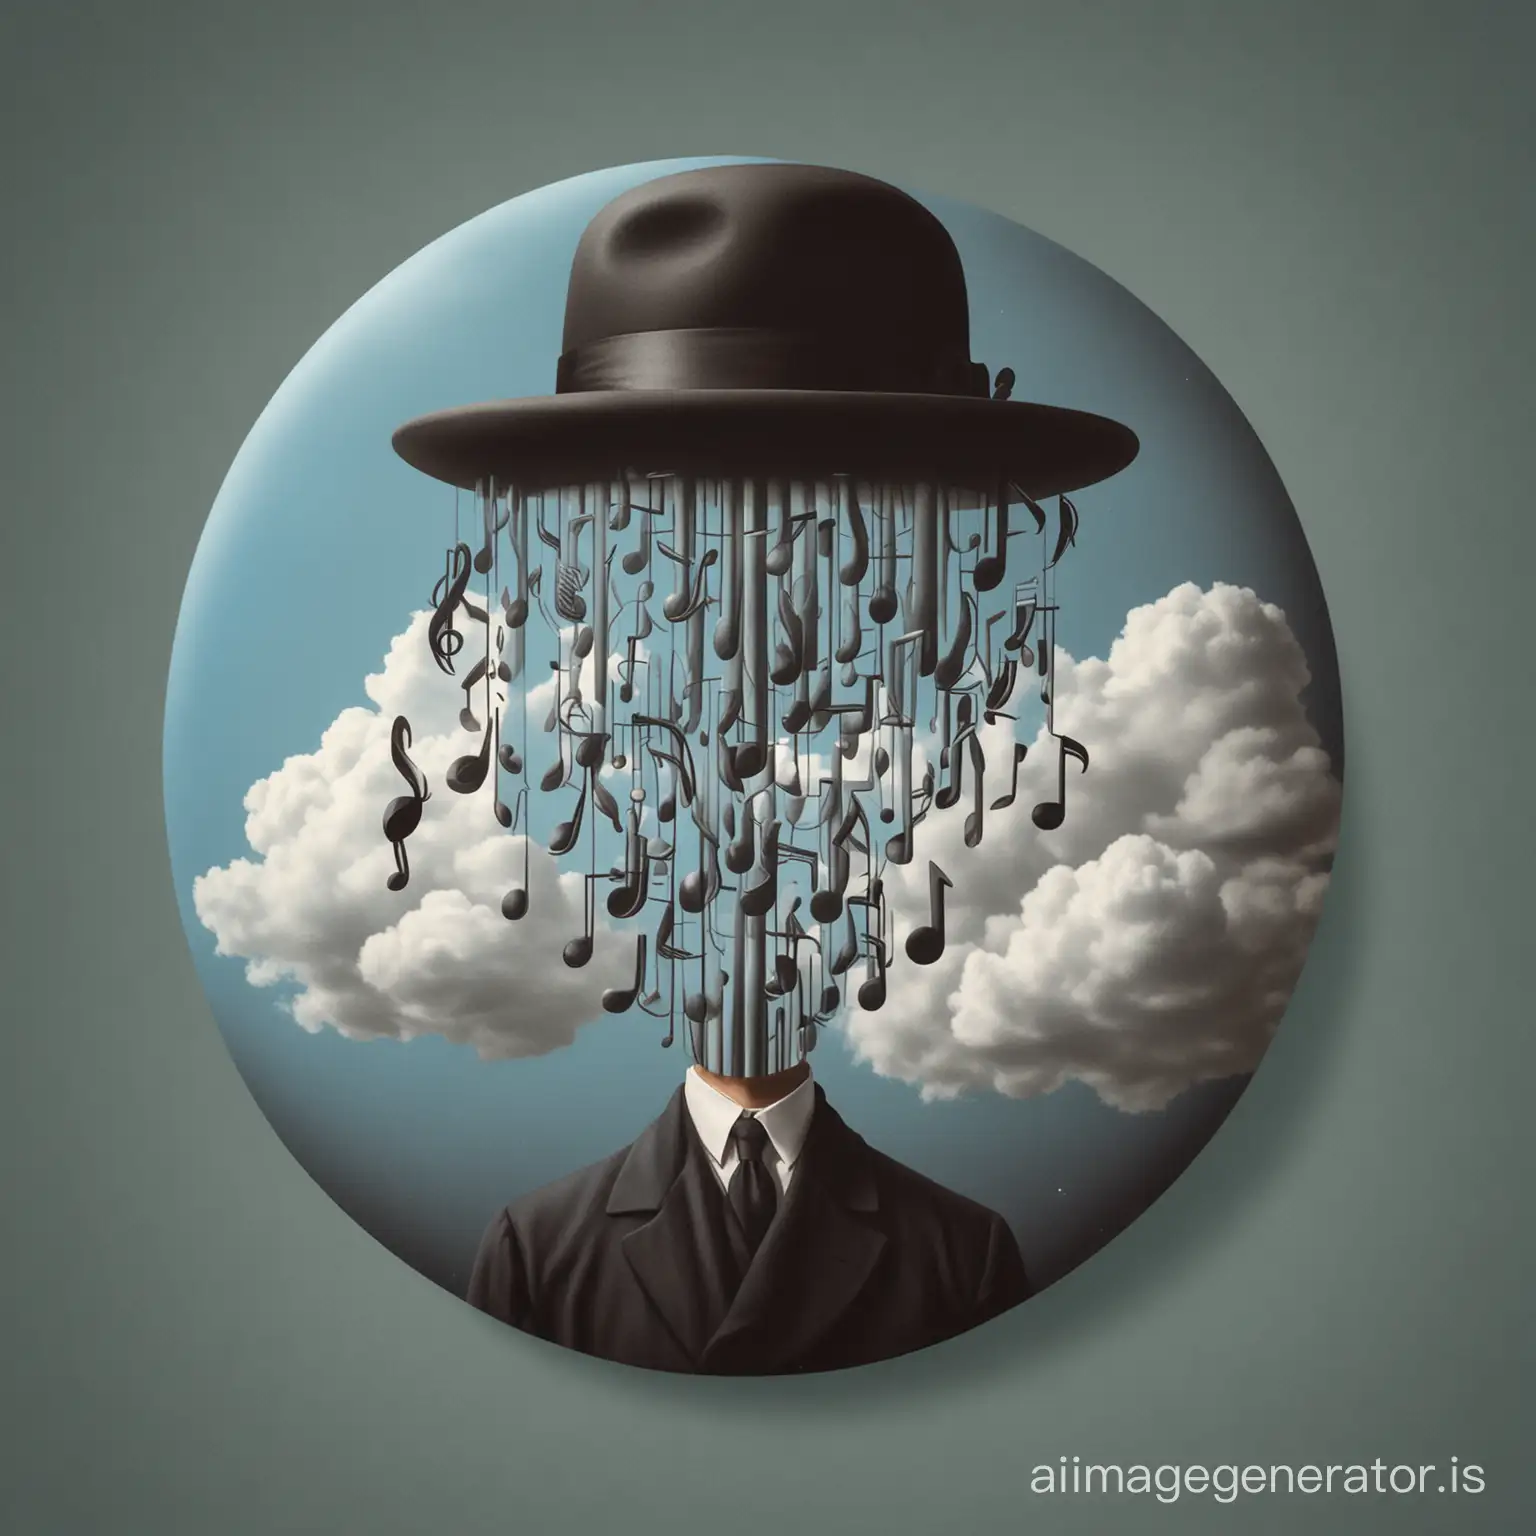 Network-of-Music-Teachers-Emblem-with-Magrittestyle-Surrealism